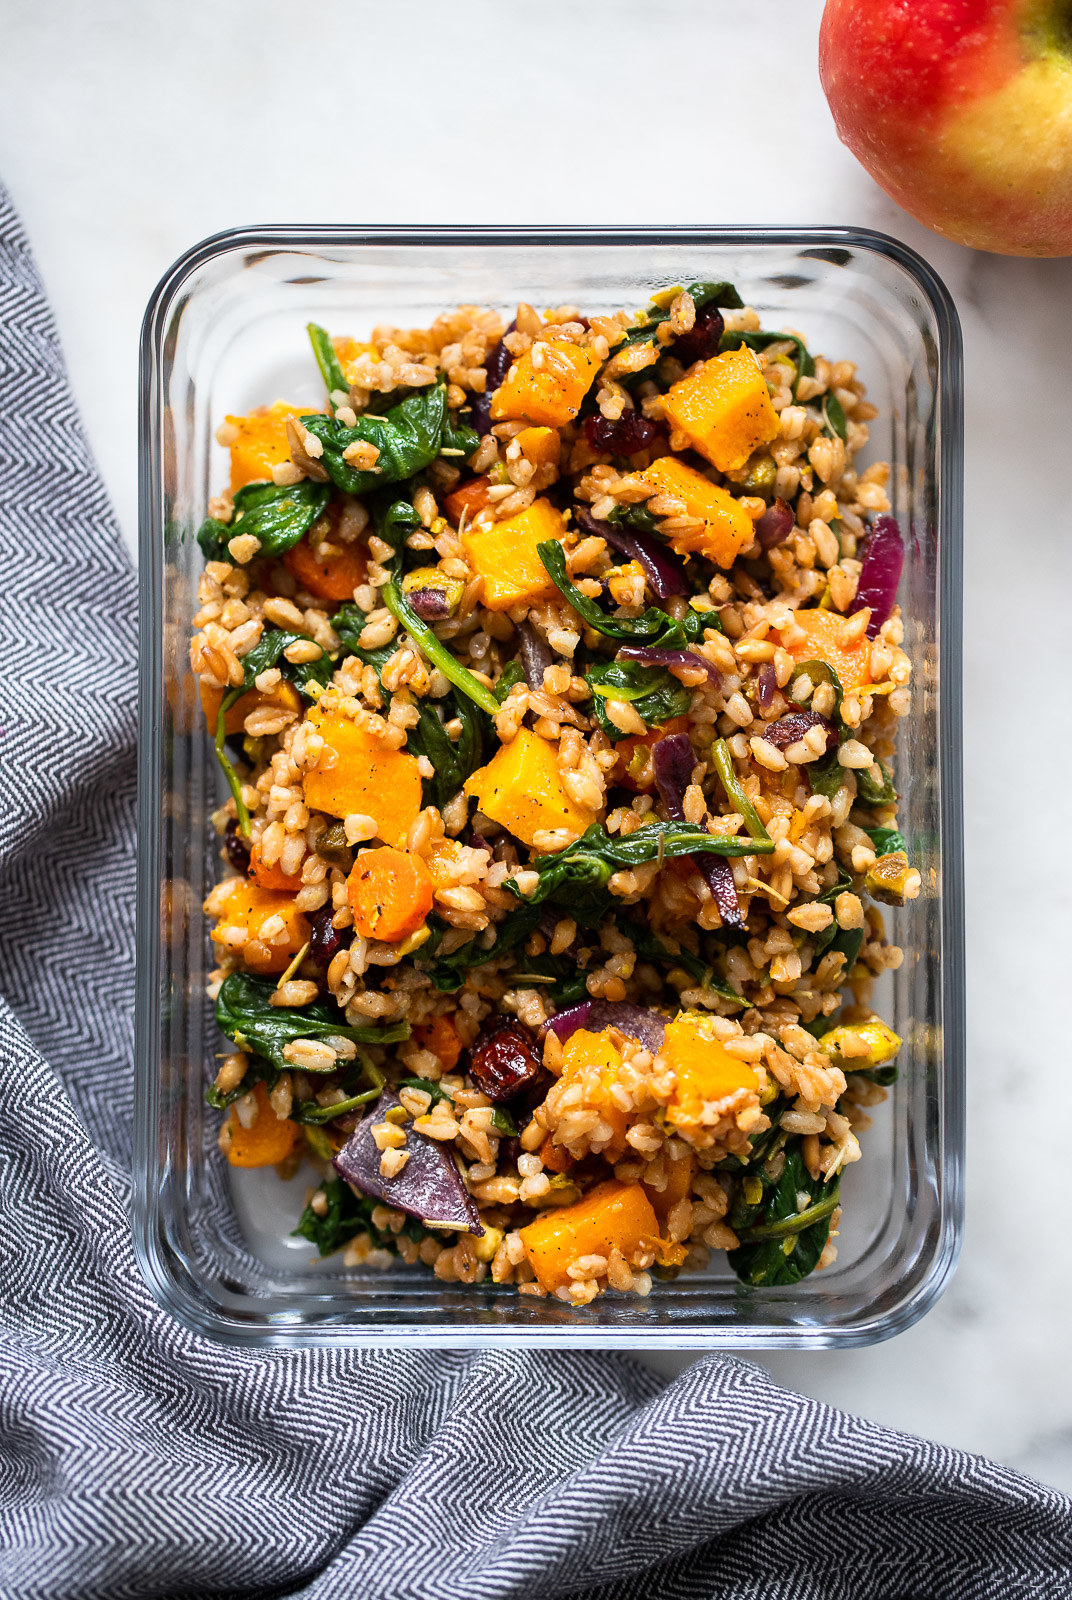 Farro salad with roasted root vegetables.